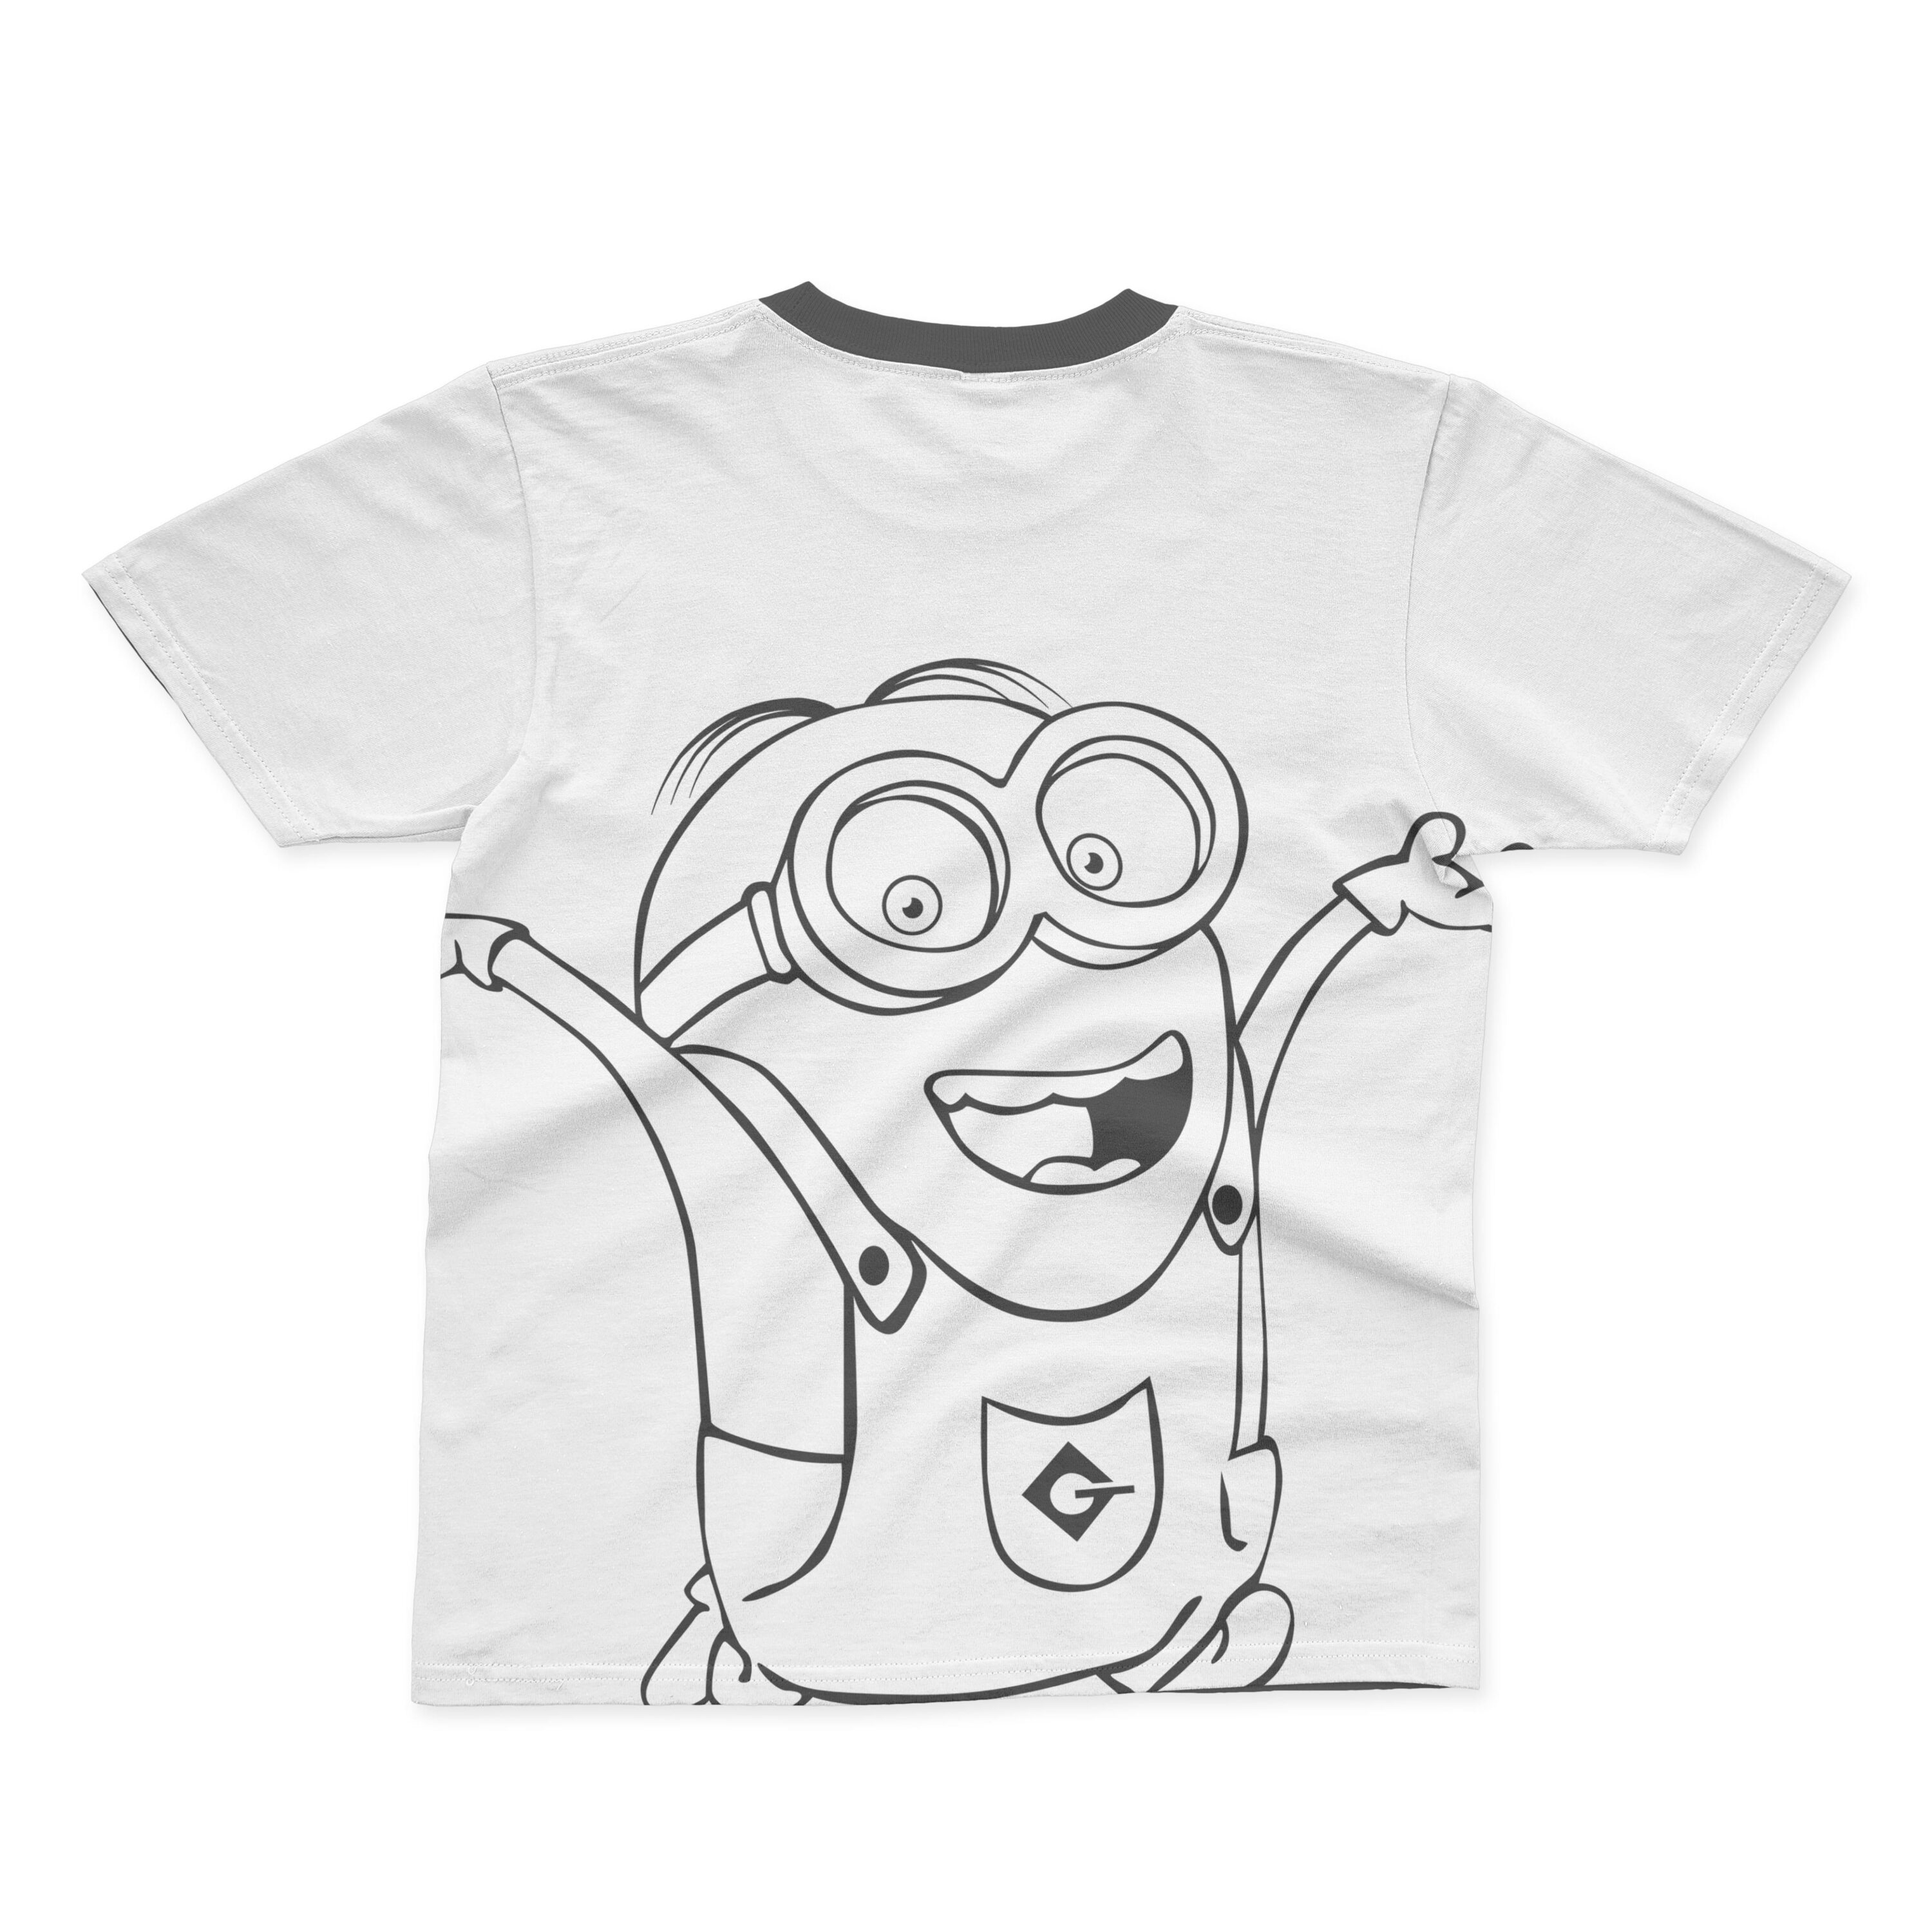 A white T-shirt with a black collar and an outline of a happy minion.